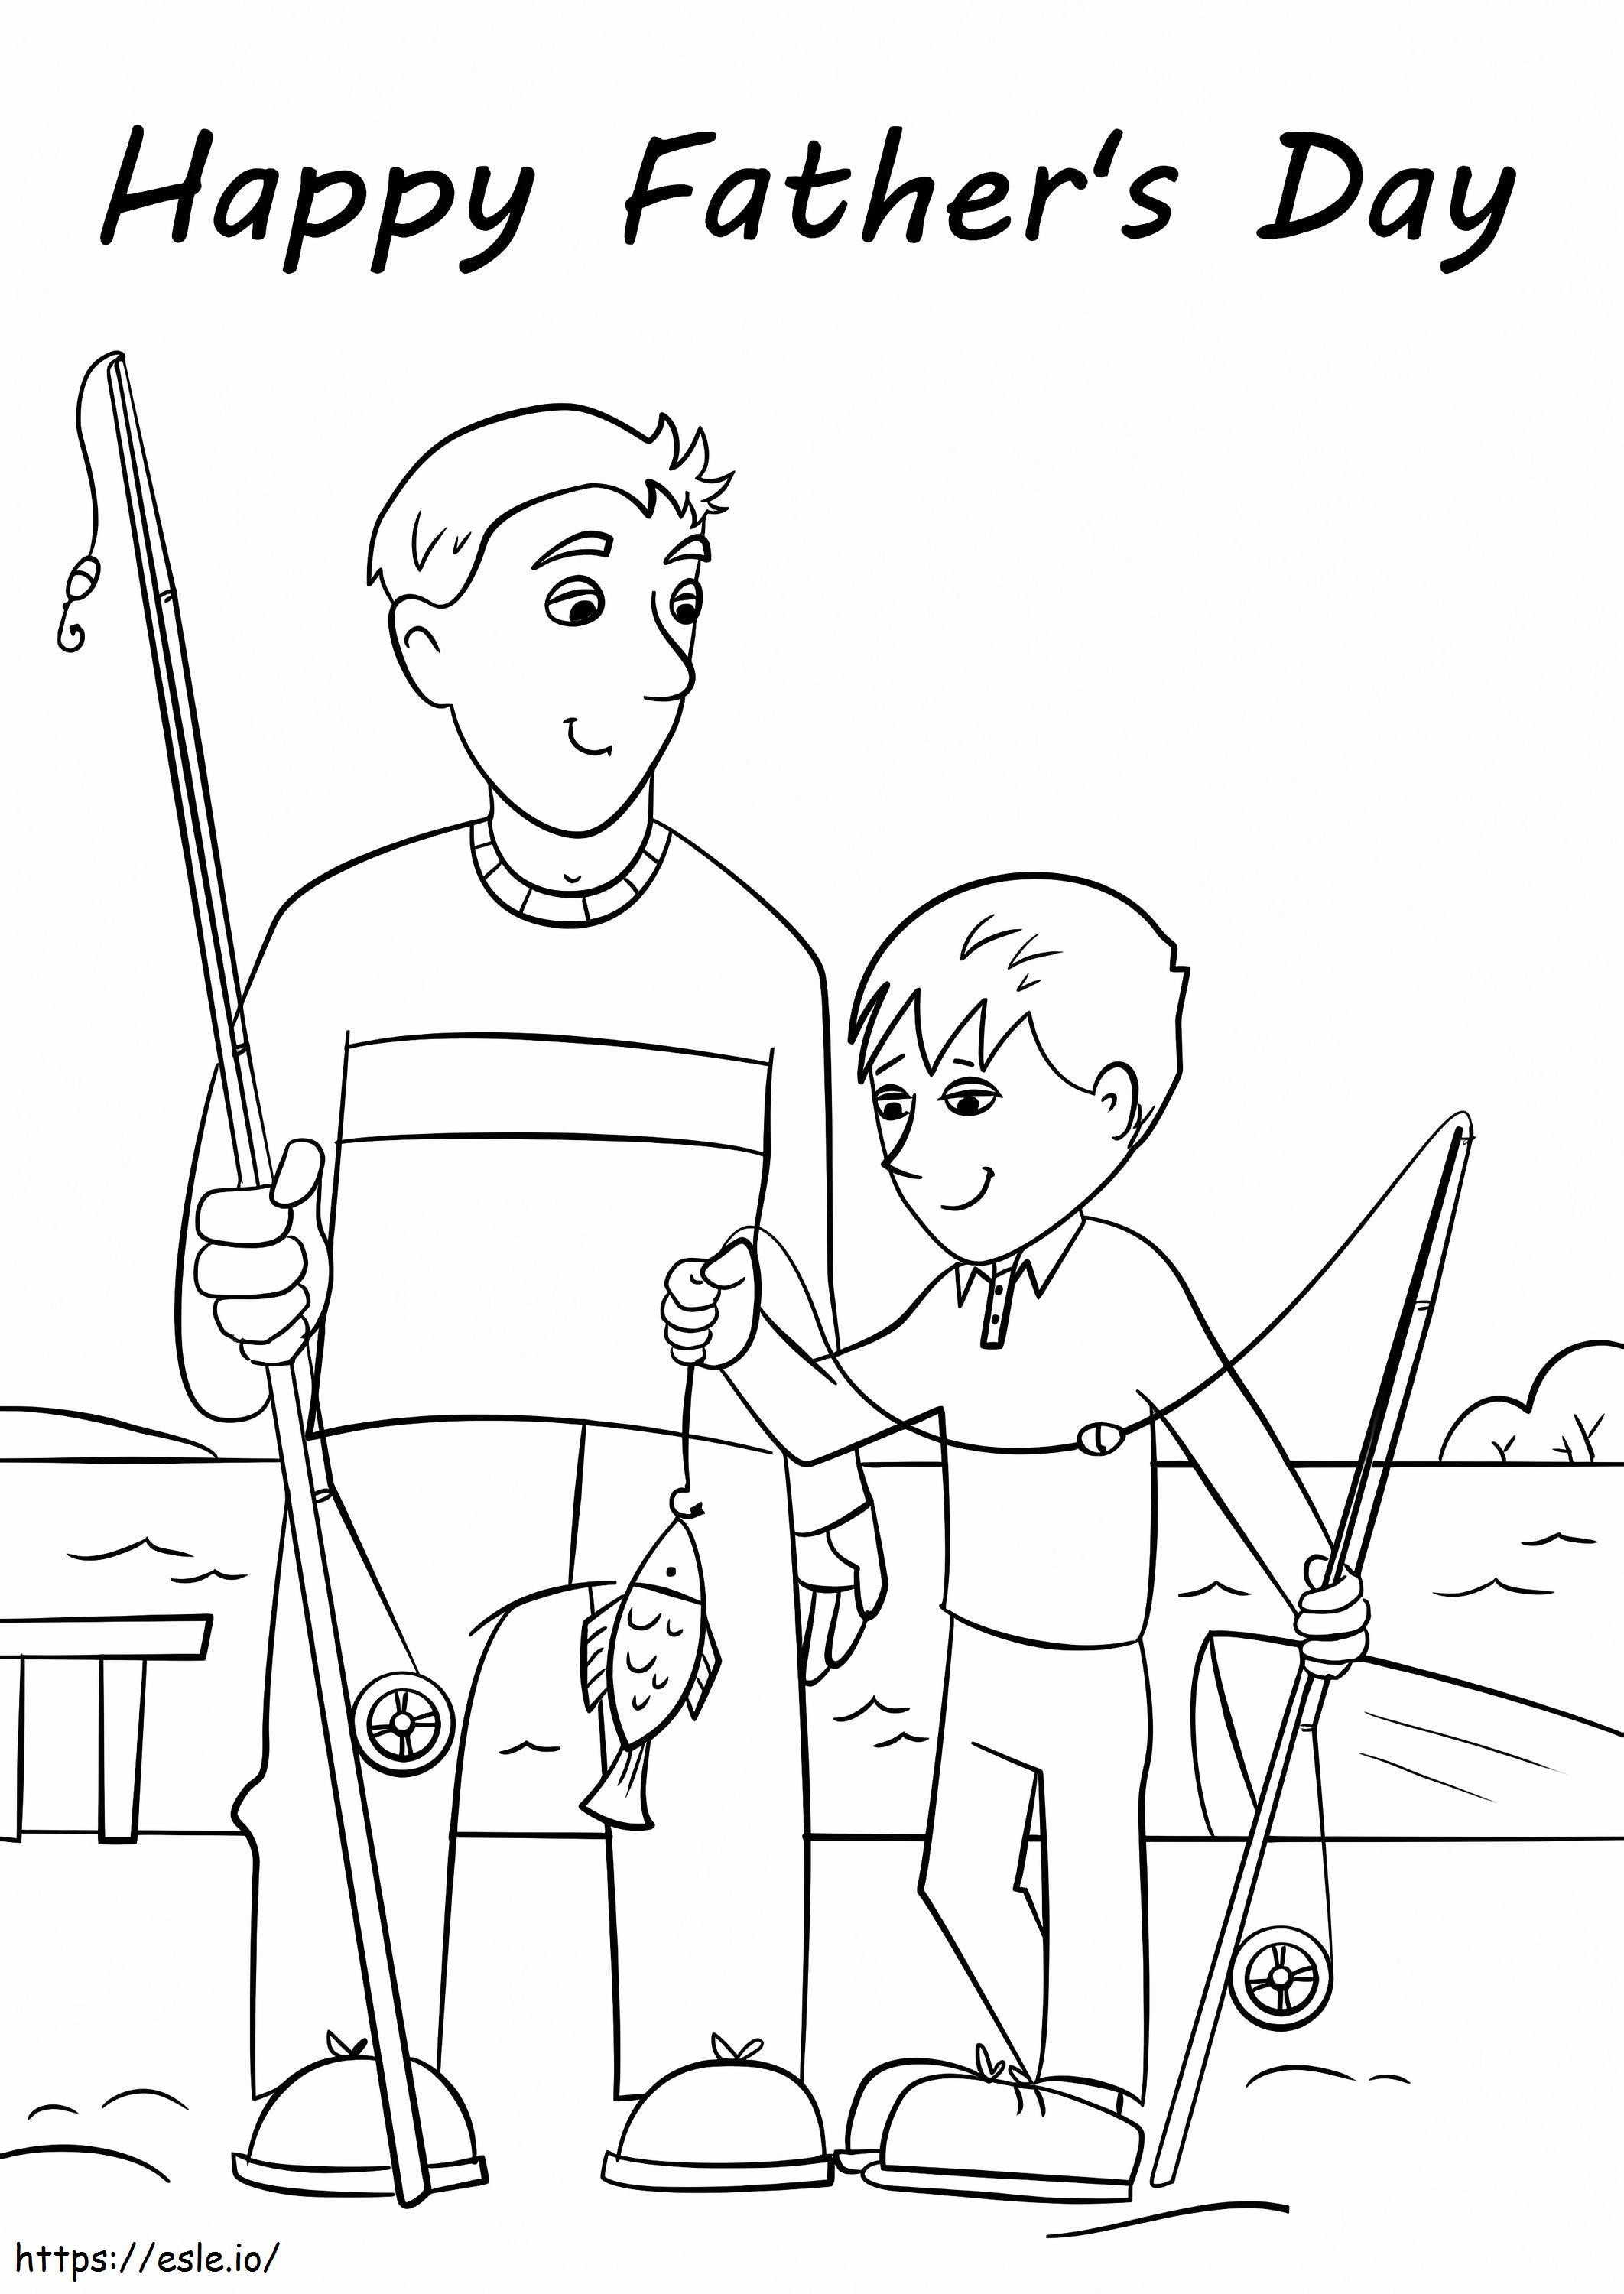 Happy Fathers Day Printable coloring page